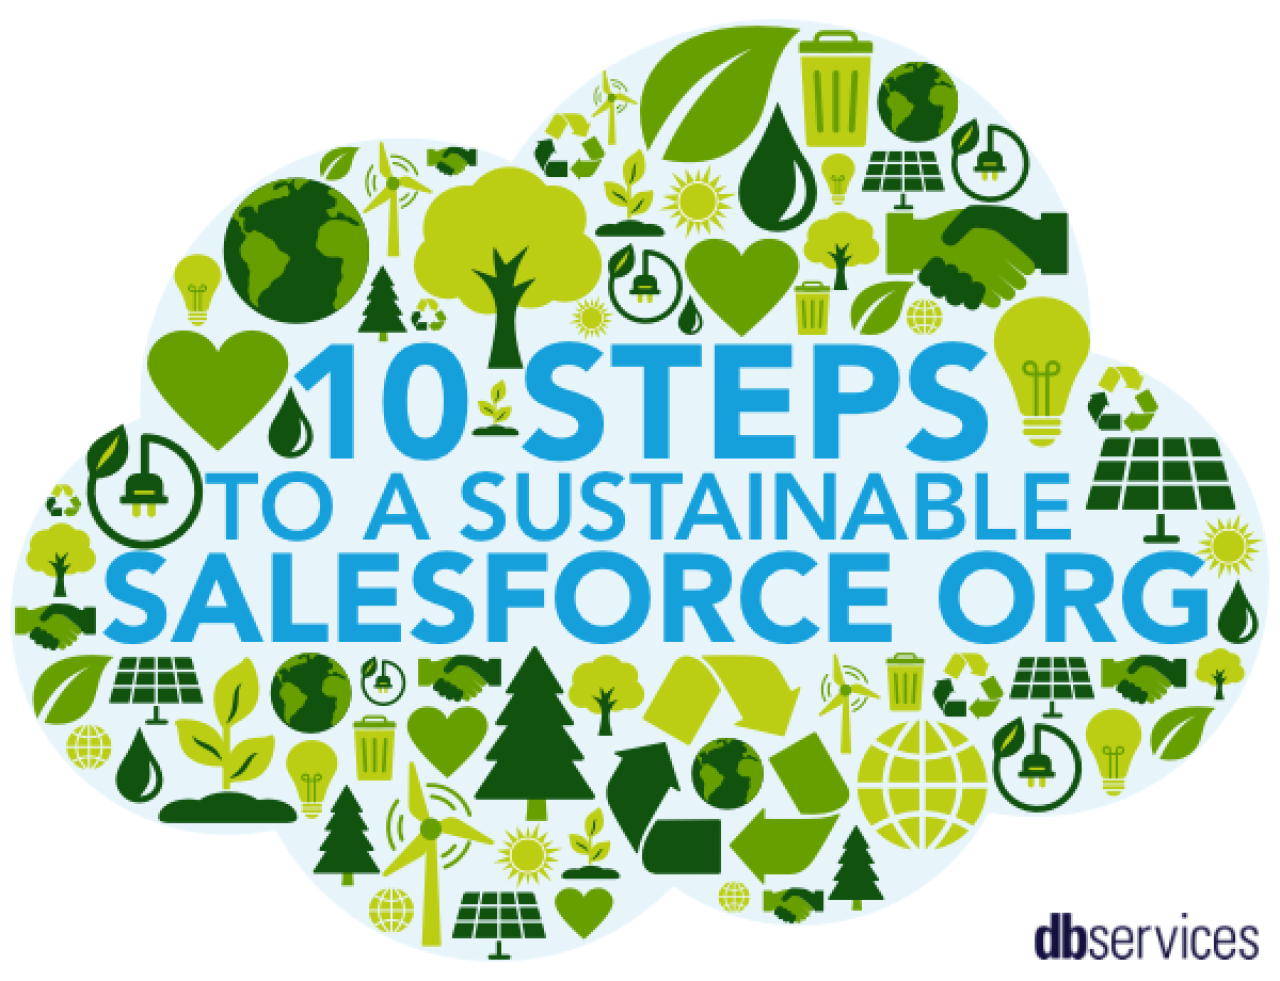 10 steps to a sustainable salesforce org.